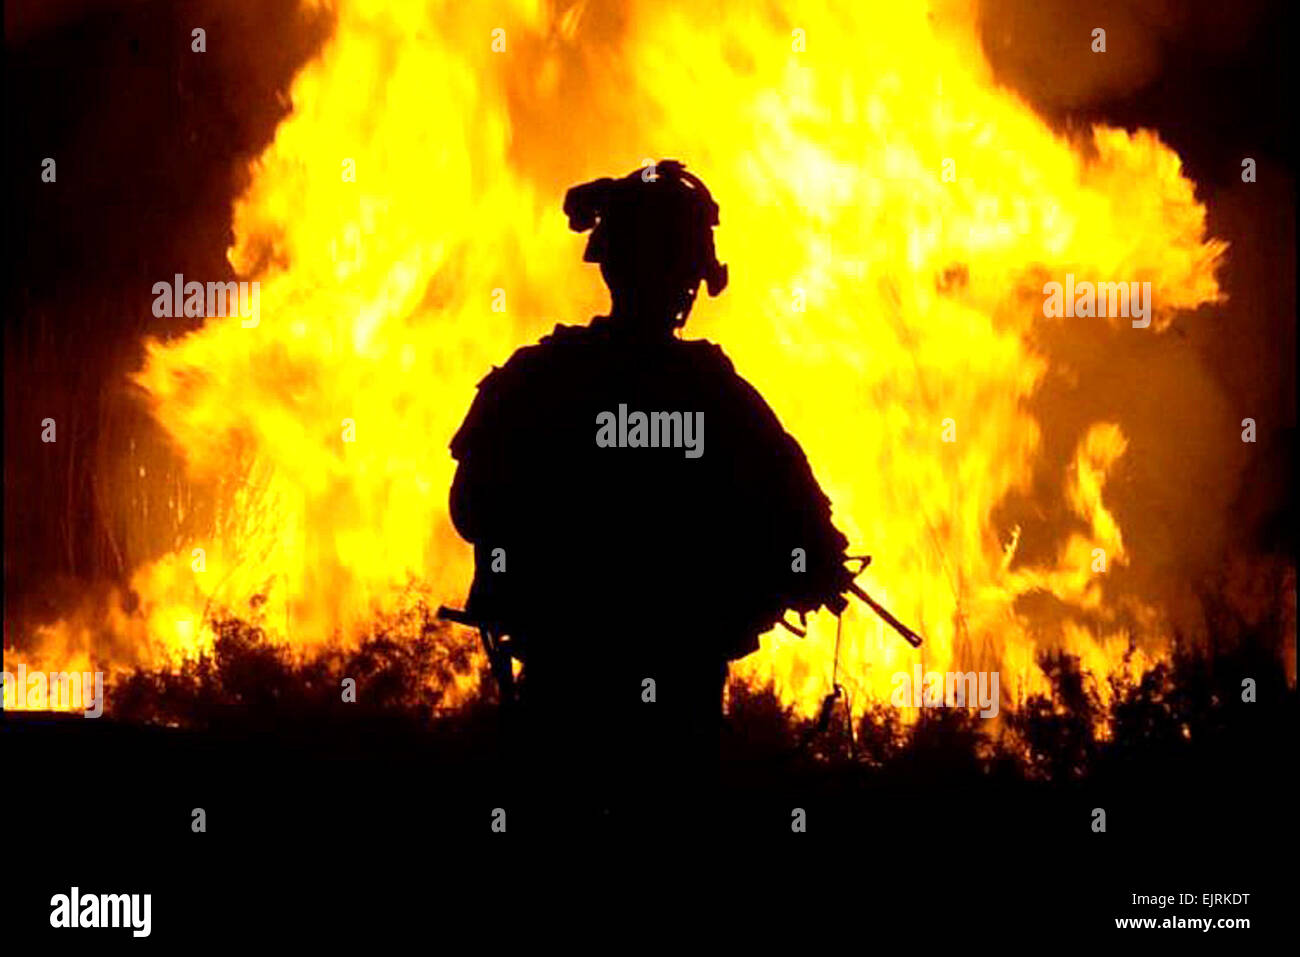 U.S. Army Sgt. William Reese watches flames rise into the night sky after setting canal vegetation ablaze in Tahwilla, Iraq, July 30, 2008. Extremists have been using the canal's thick vegetation to plant bombs under the cover of darkness. The soldiers are assigned to Company B, 1st Battalion, 6th Infantry Regiment. Spc. David J. Marshall Stock Photo